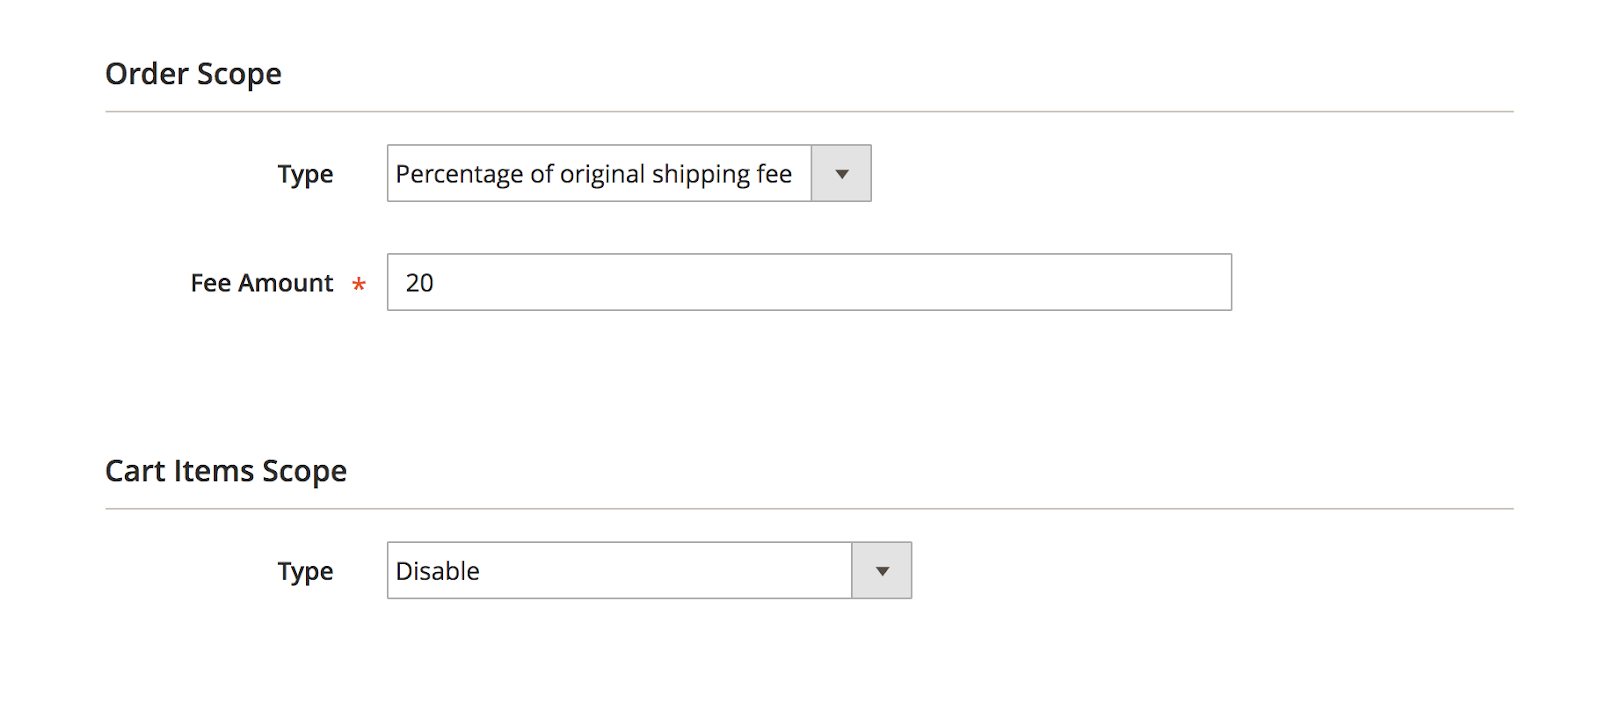 set Percentage of original shipping fee for Type